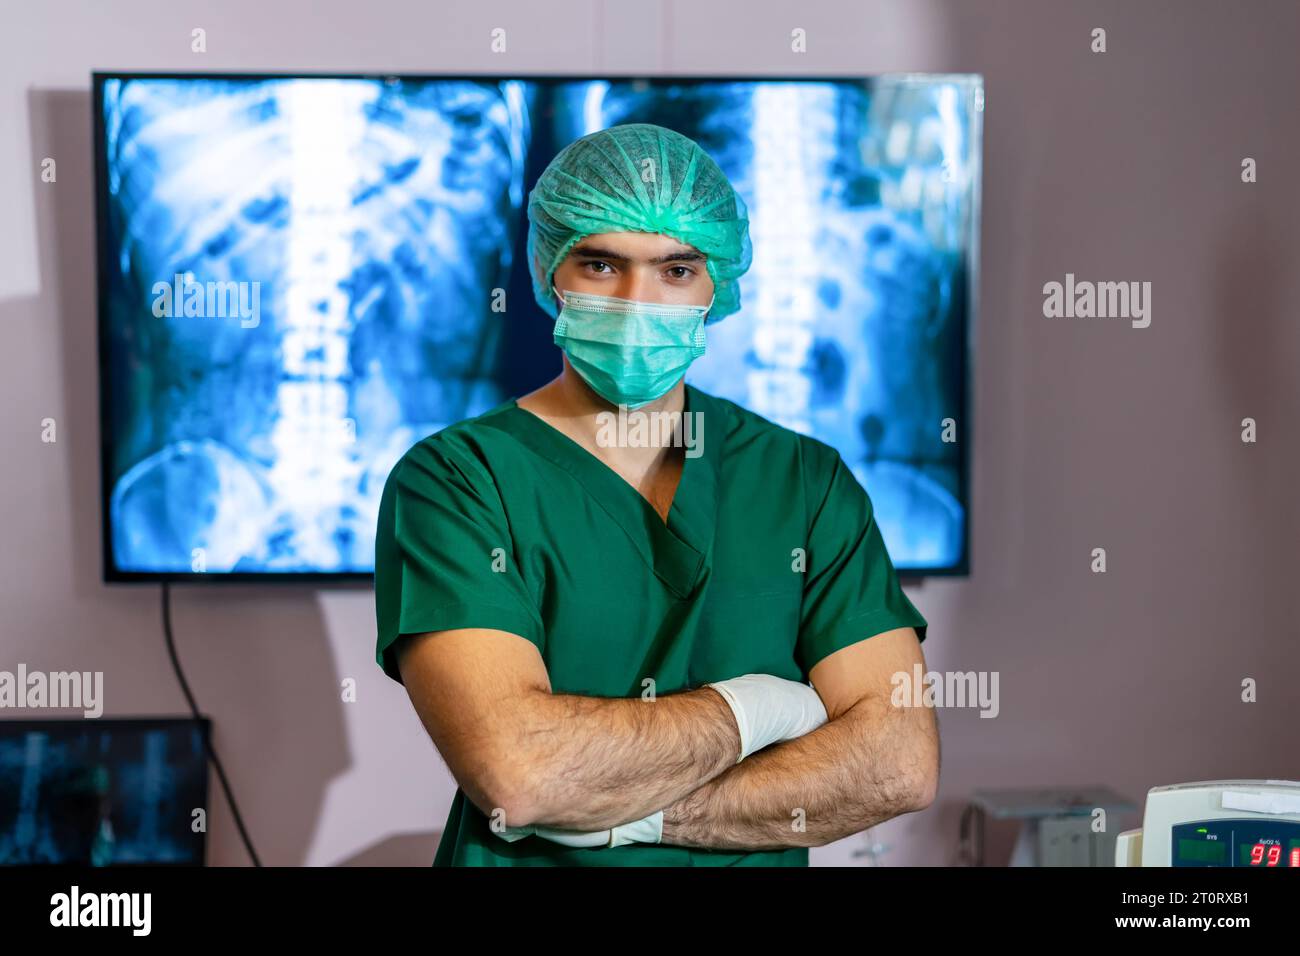 Man wearing green surgical gown standing with arms crossed in operating room, show readiness start surgery for patients who waiting for treatment. Vir Stock Photo